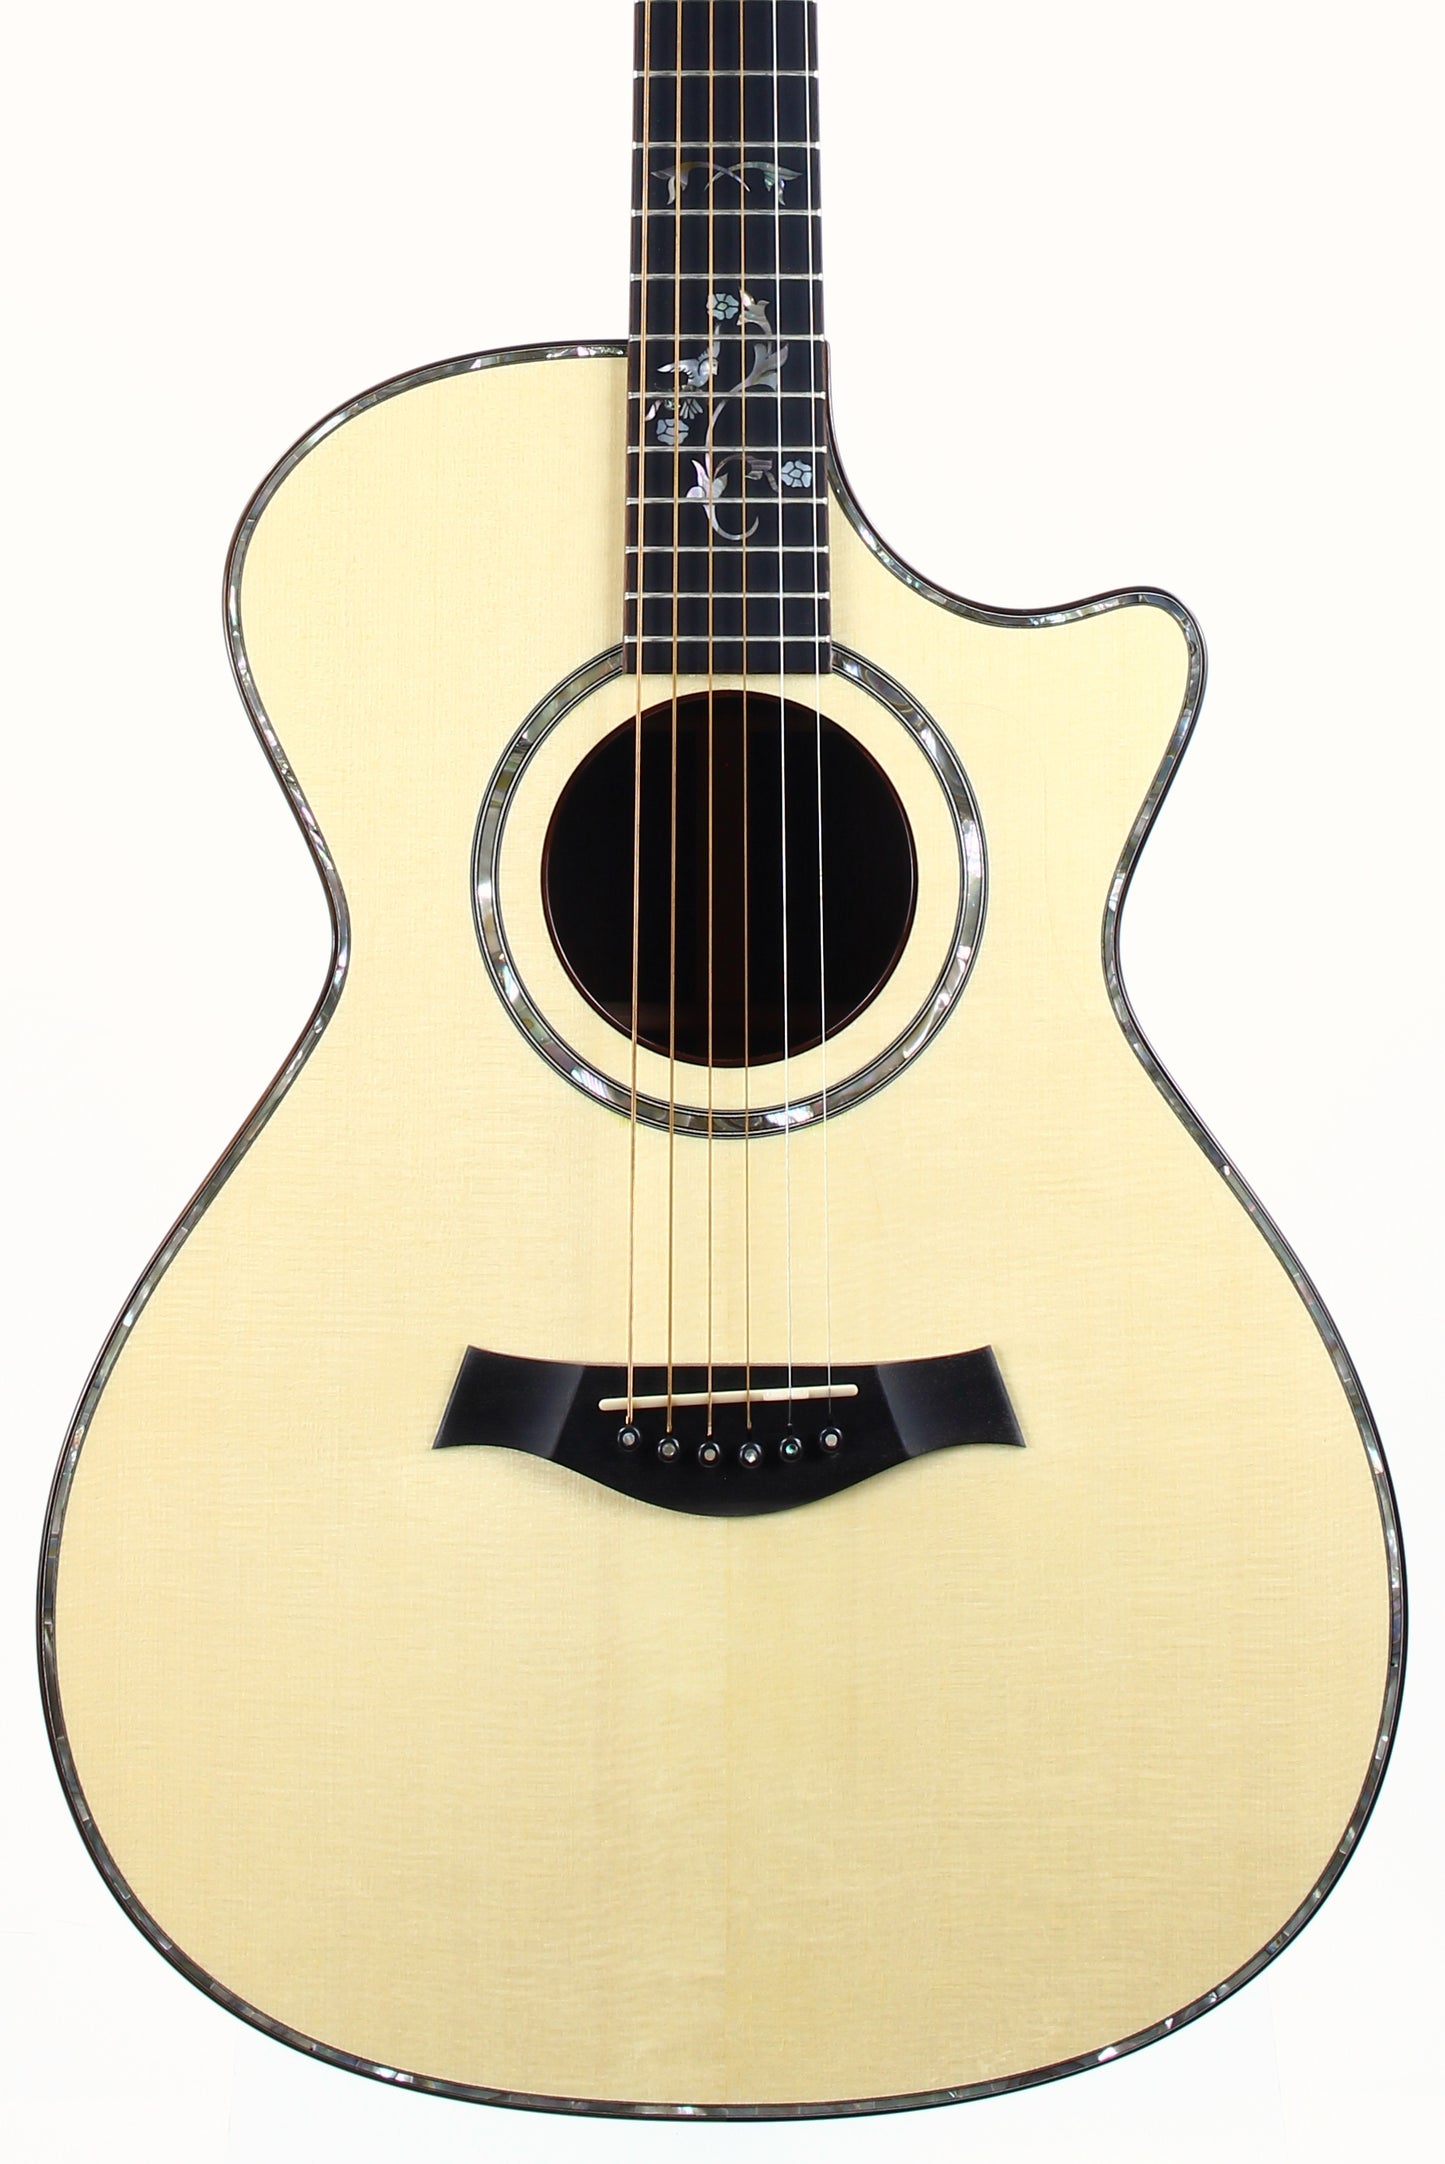 MINTY 1993 Taylor 912c Grand Concert Acoustic Guitar | Cindy Inlay 900 series